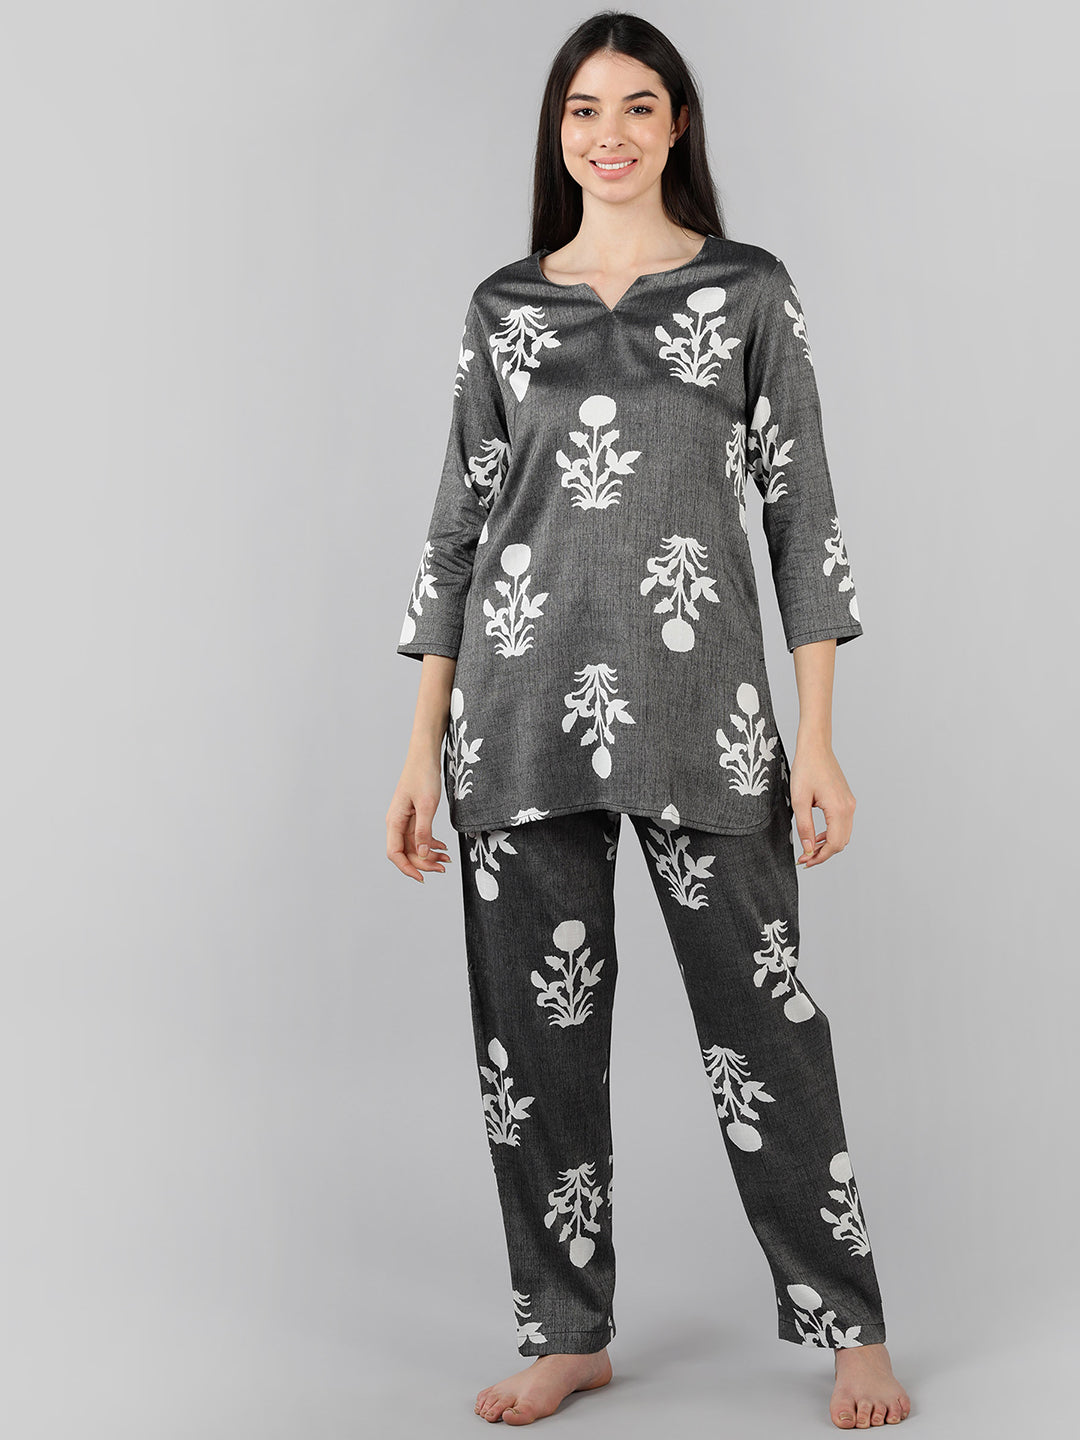 Women's Grey Cotton Floral Printed Night Suit  - Ahika